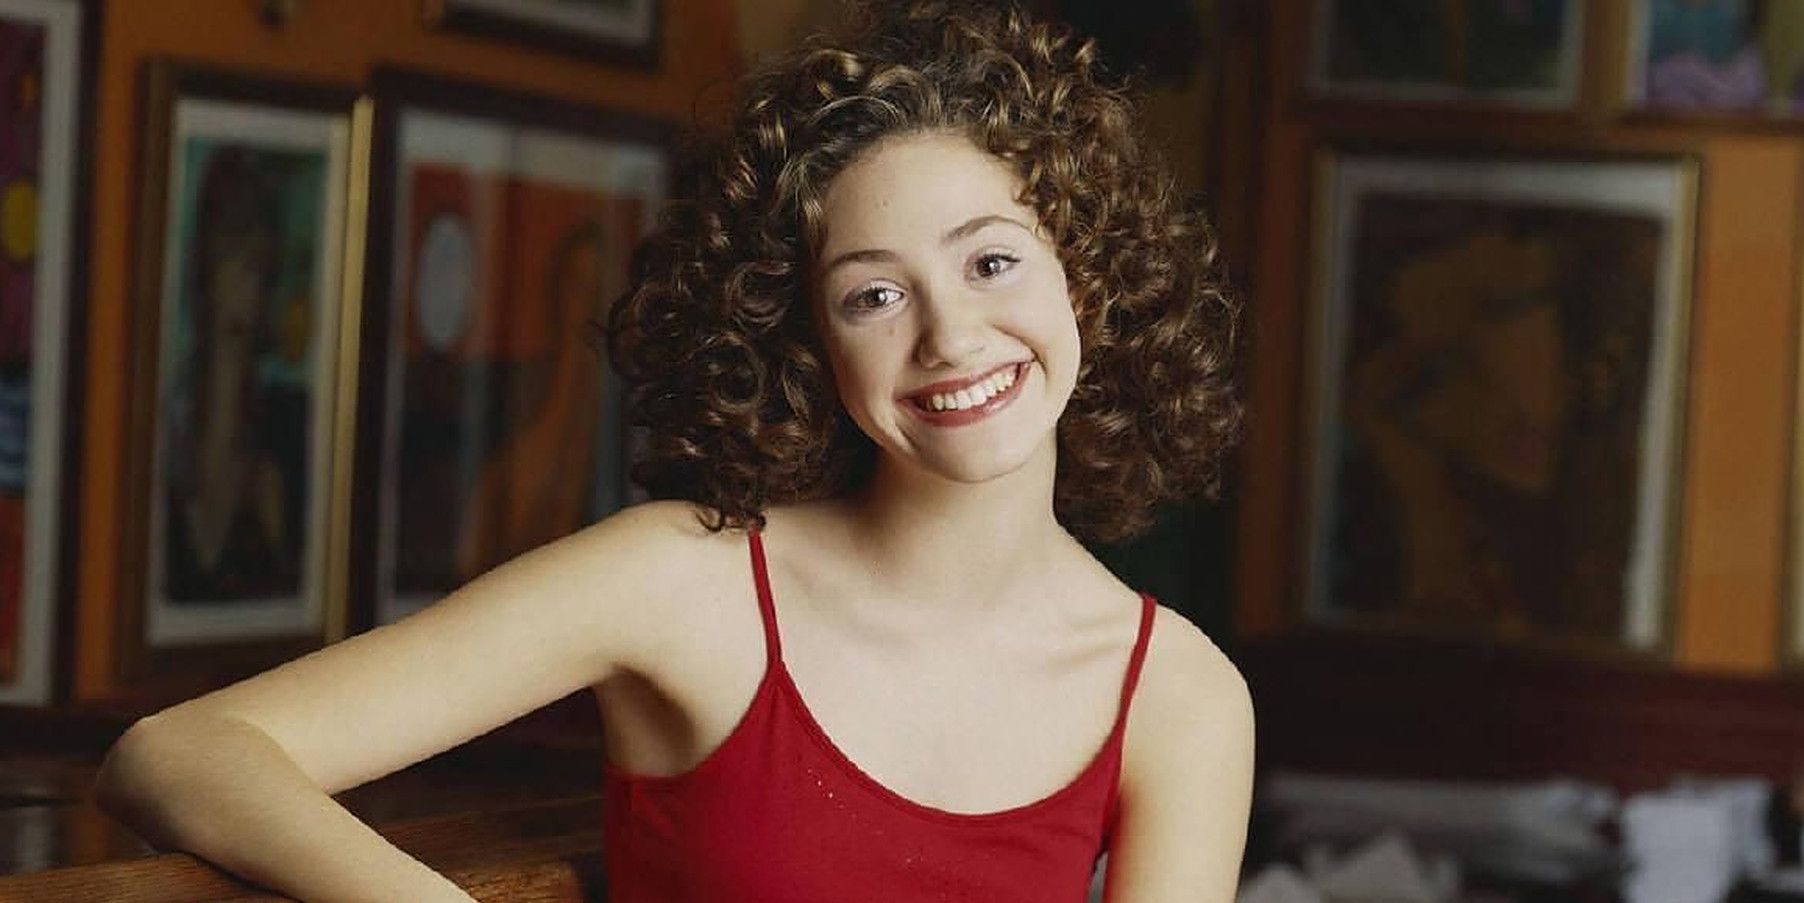 emmy rossum when she was young